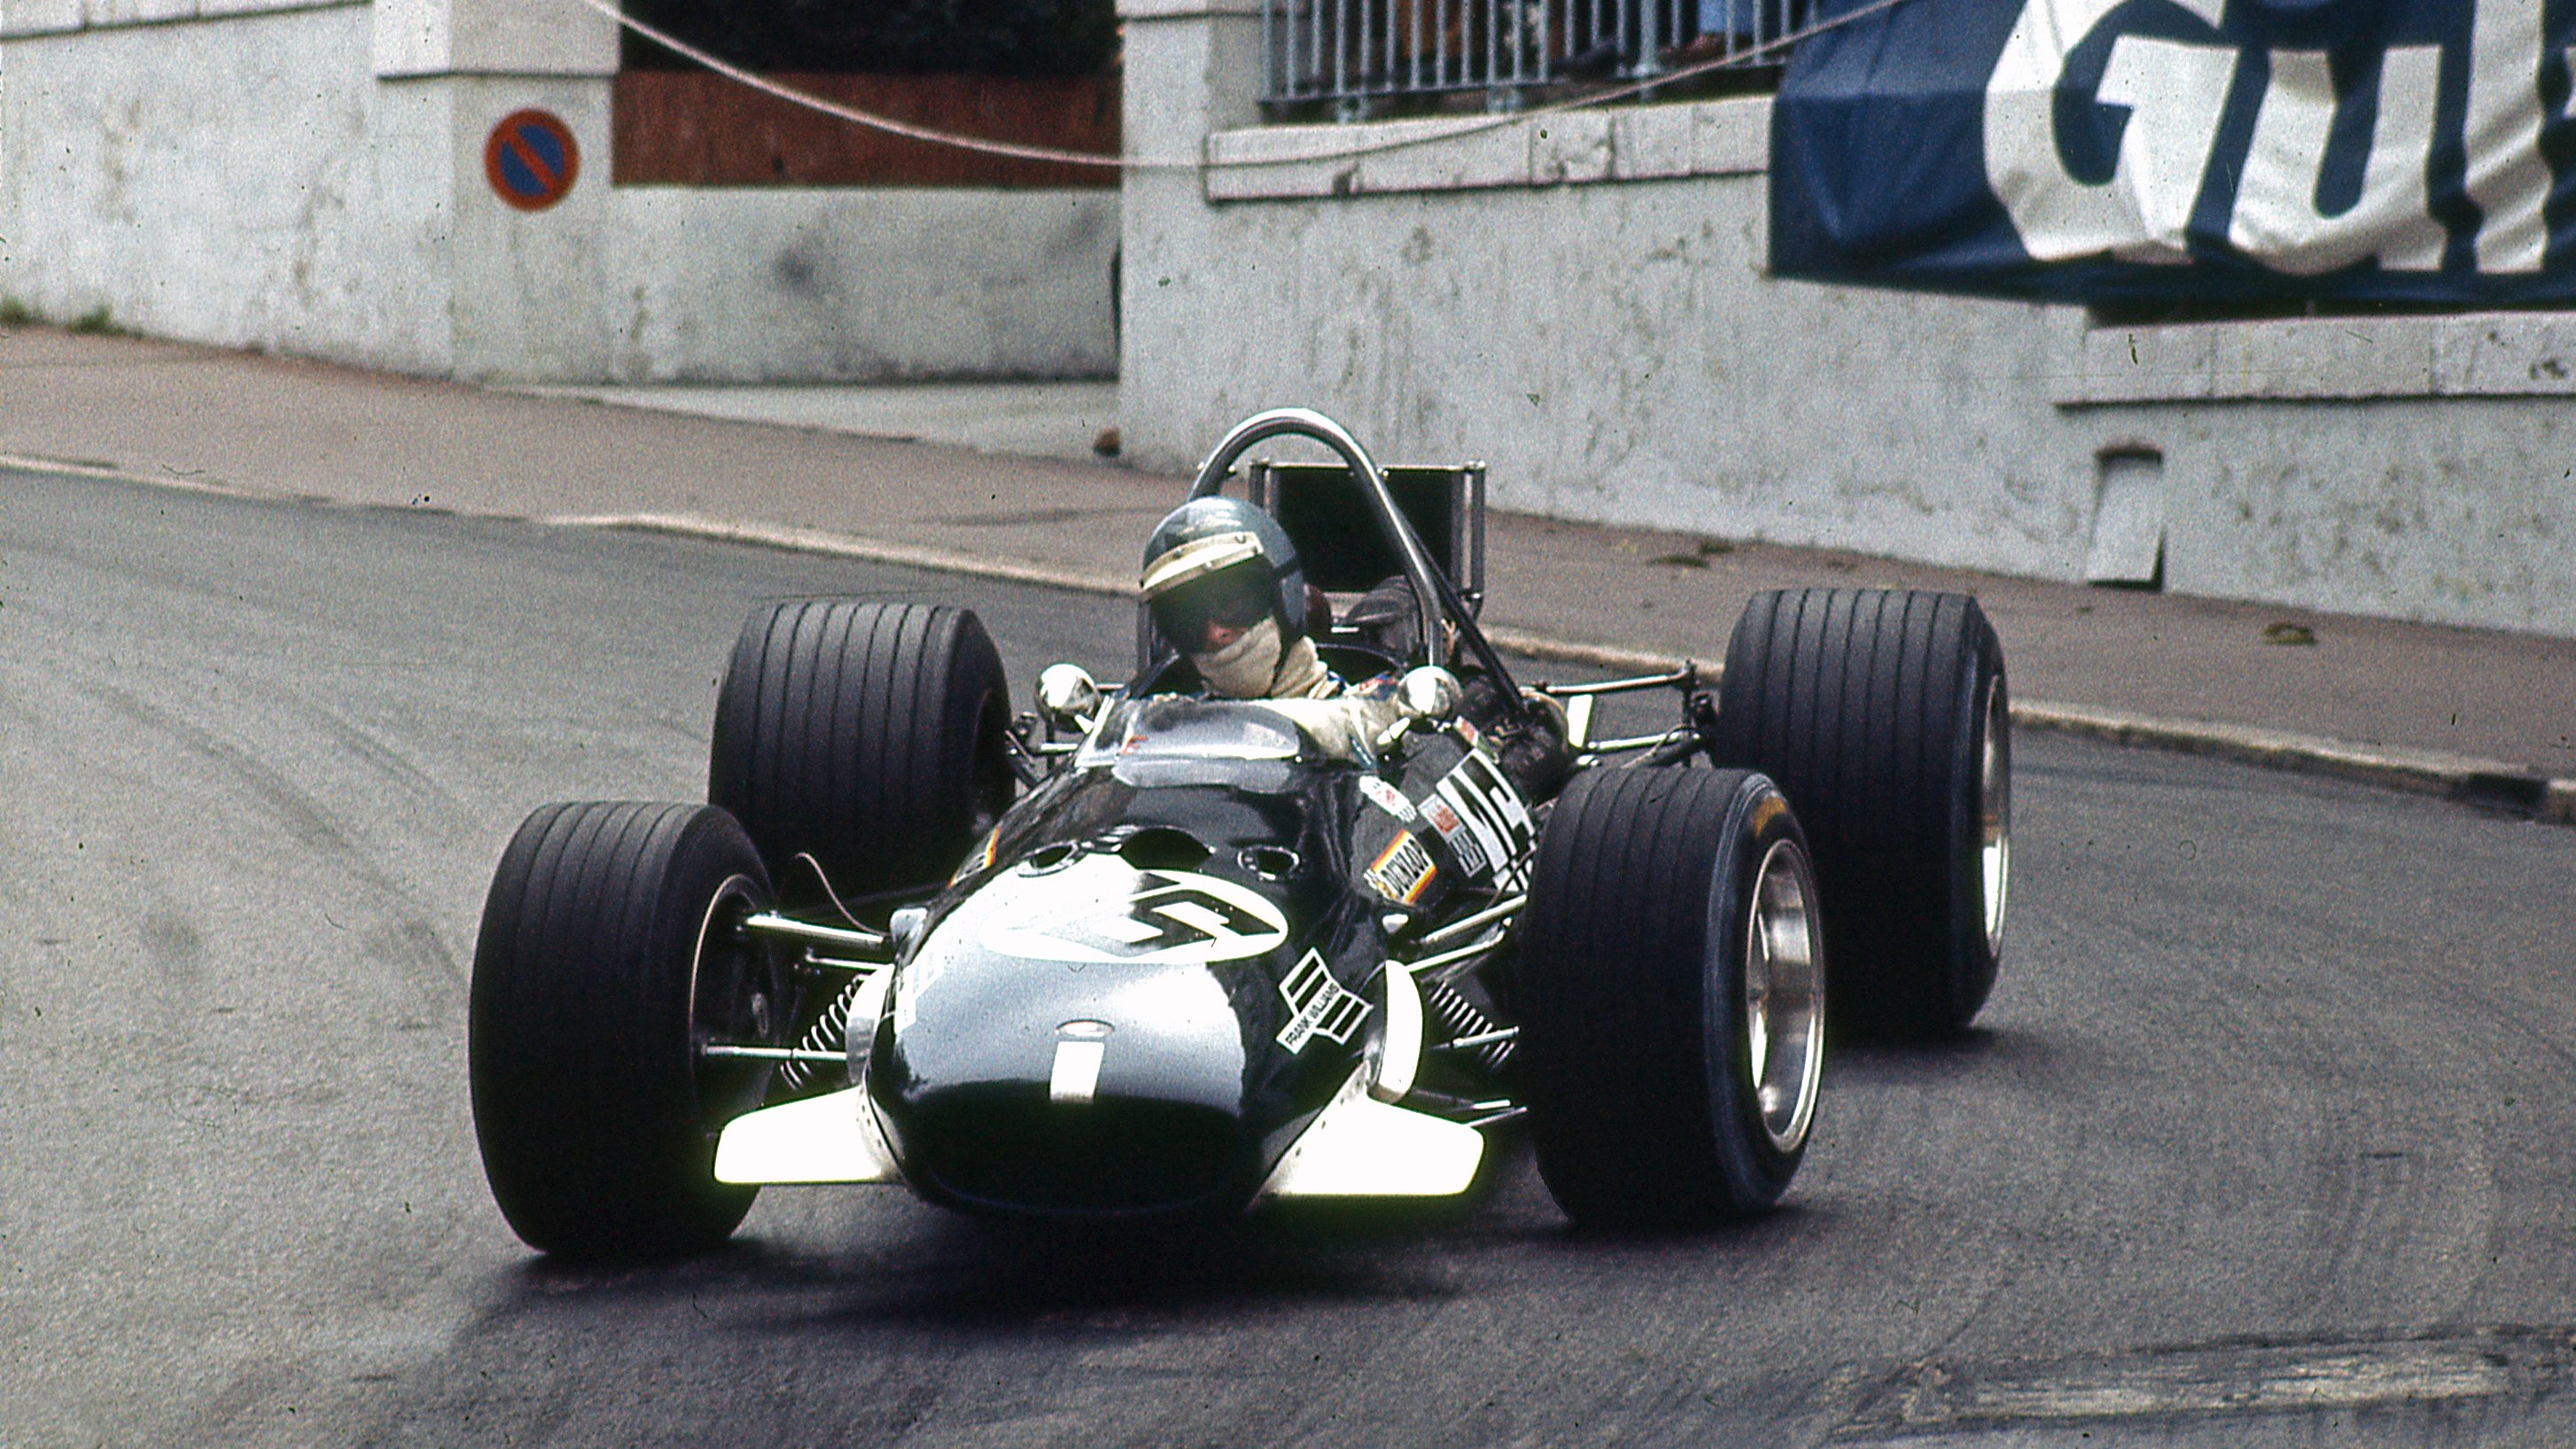 Brabham Piers Courage Climbed From Ninth To Second To Earn His Maiden F1 Podium Aboard The Frank Williams Entered Brabham Ford Bt26a At The 1969 Monaco Grand Prix Otd Brabhamheritage Brabhamf1